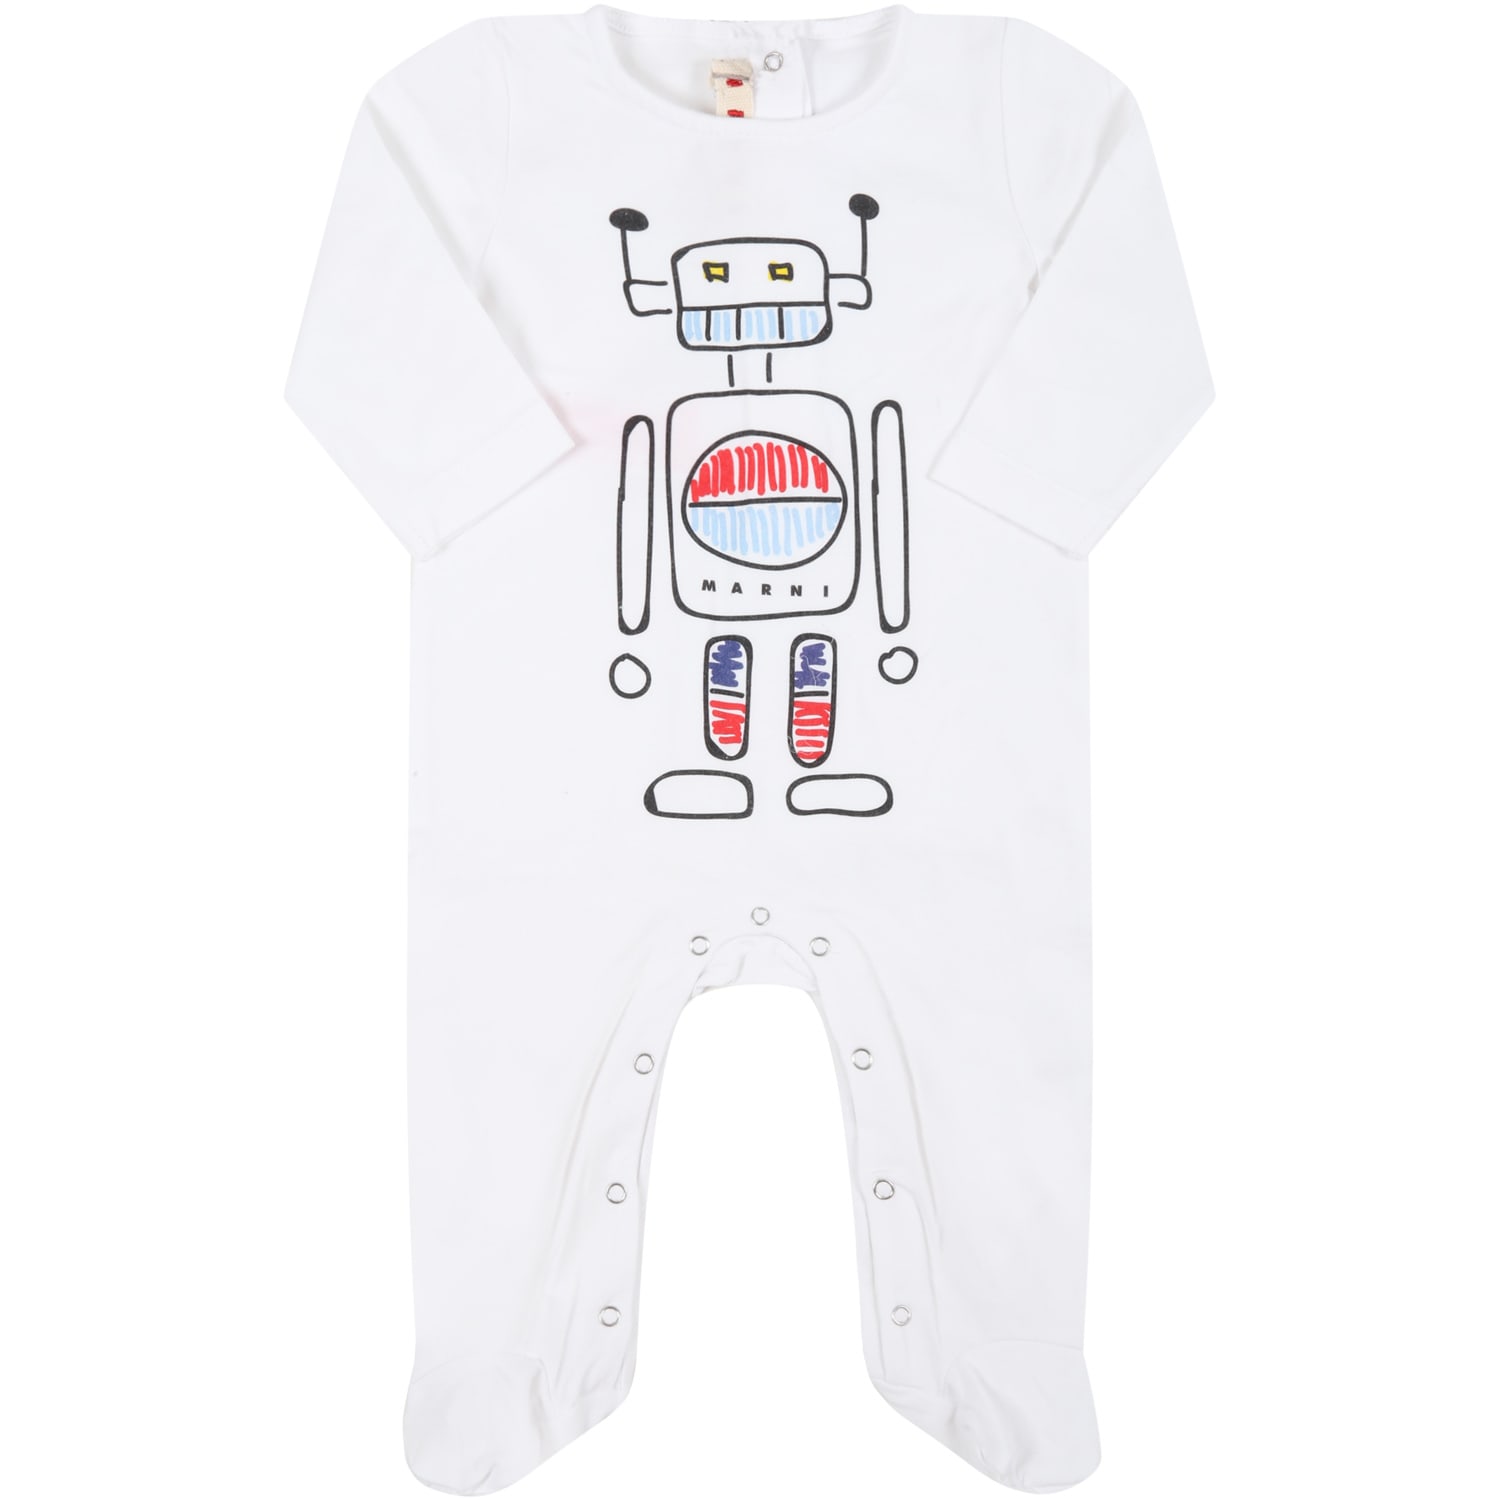 Marni White Babygrow For Baby Kids With Robot